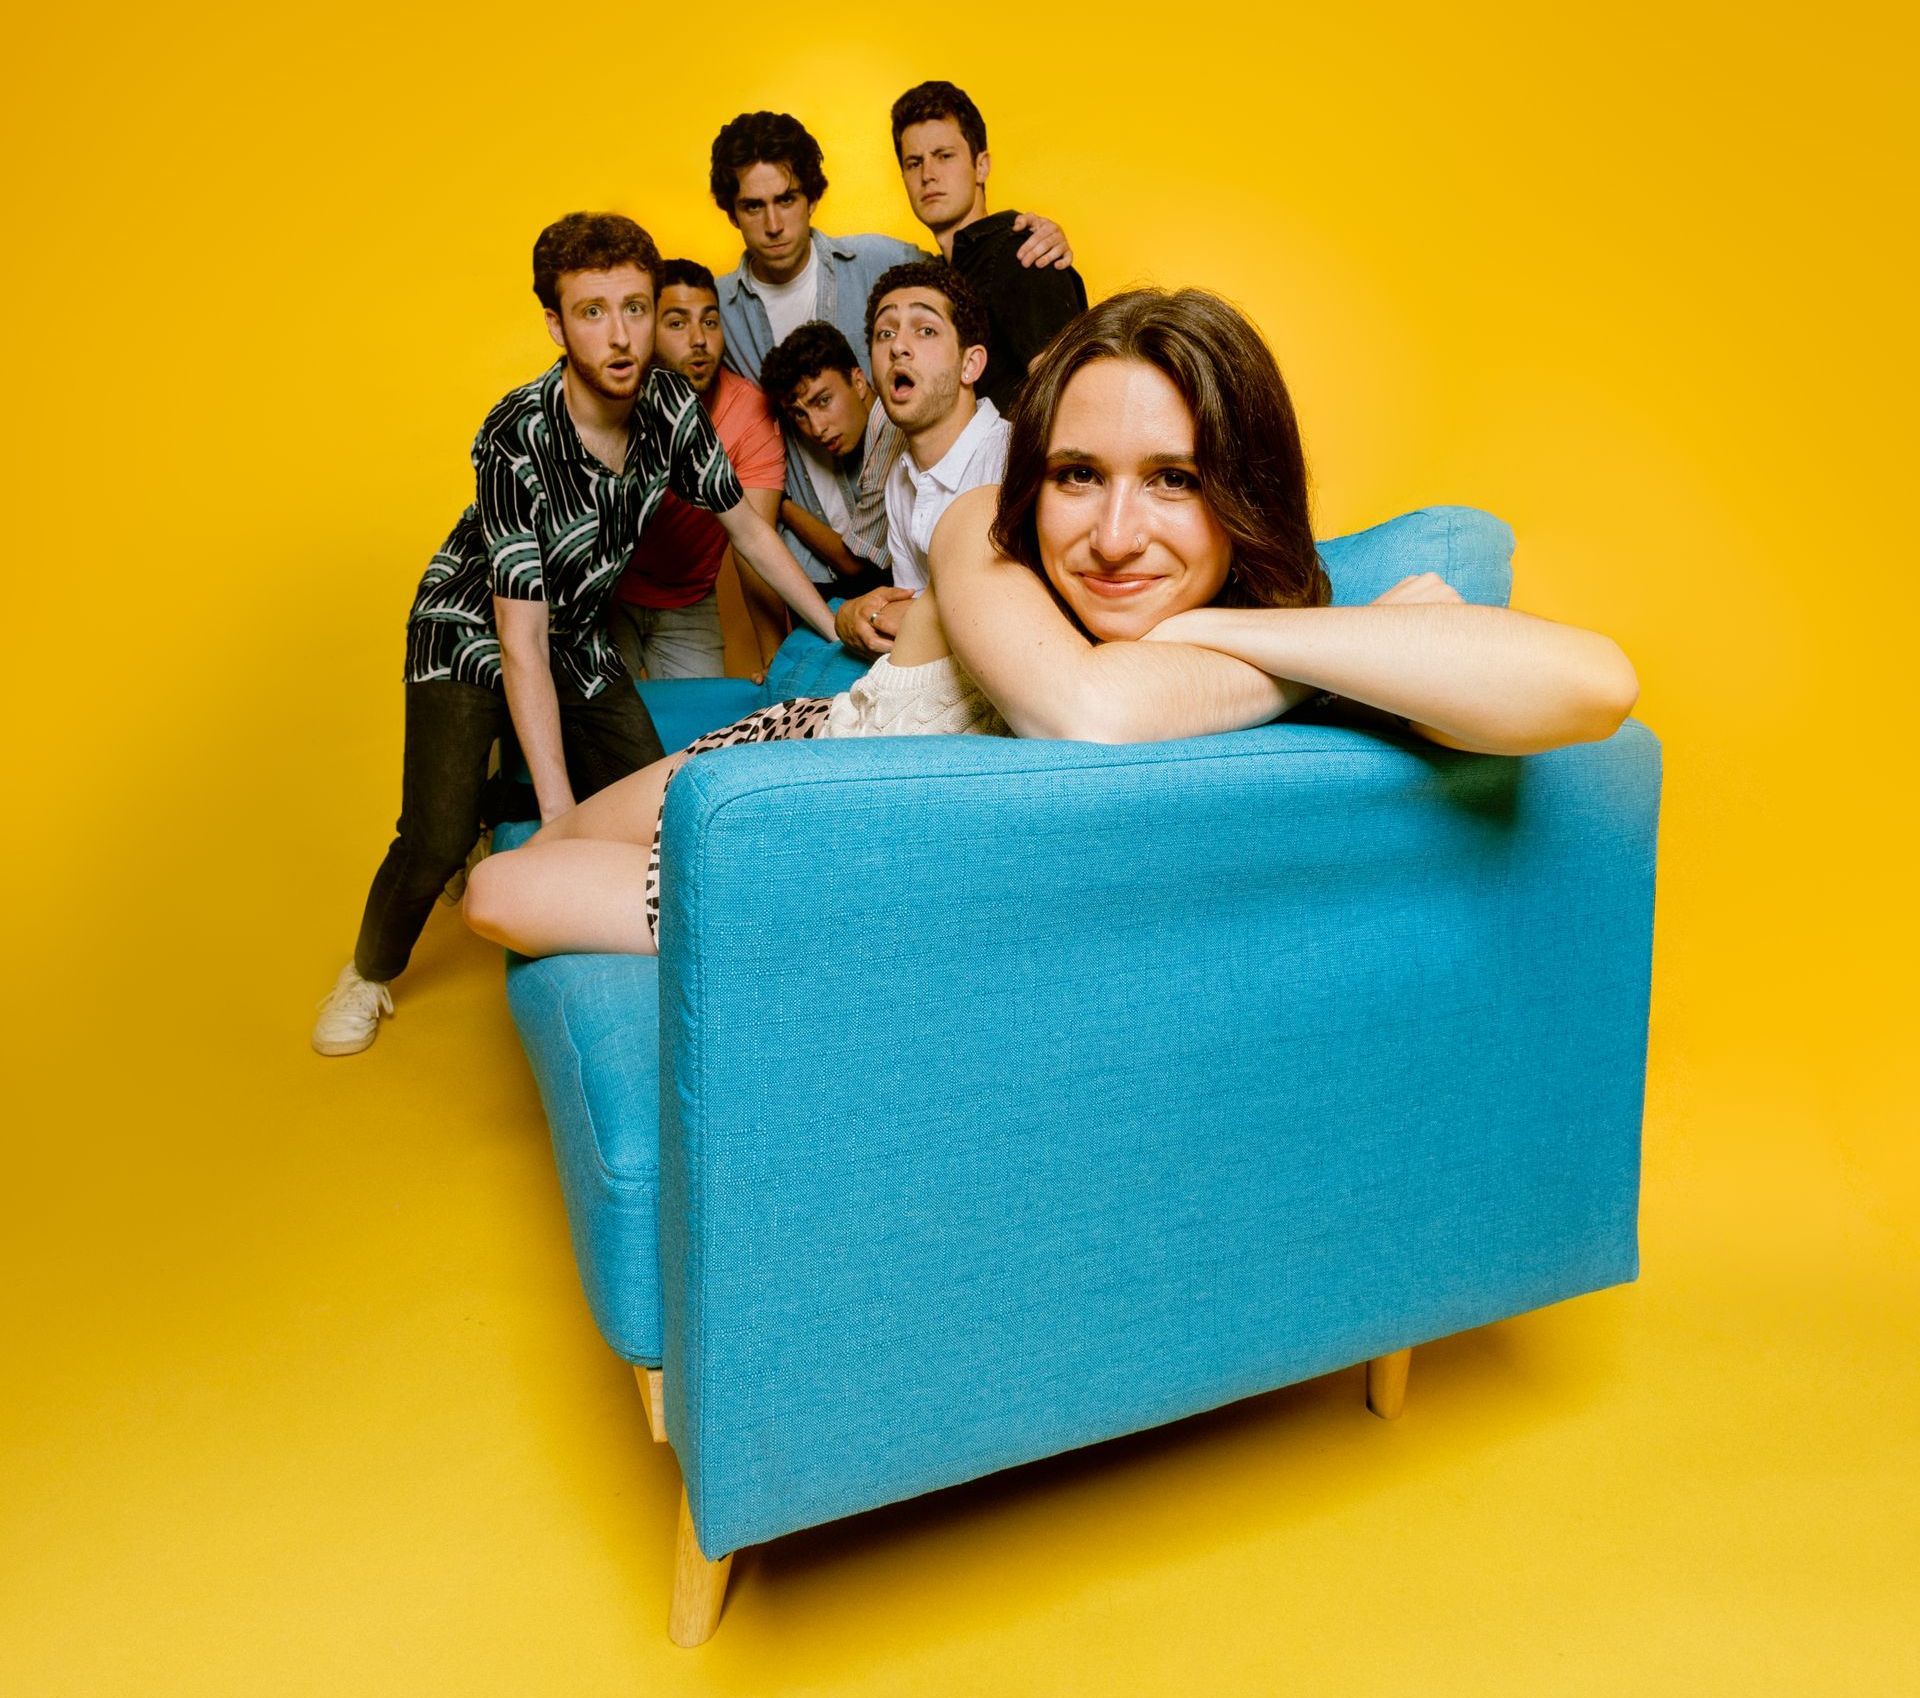 a group of people are posing for a picture with a woman laying on a blue couch